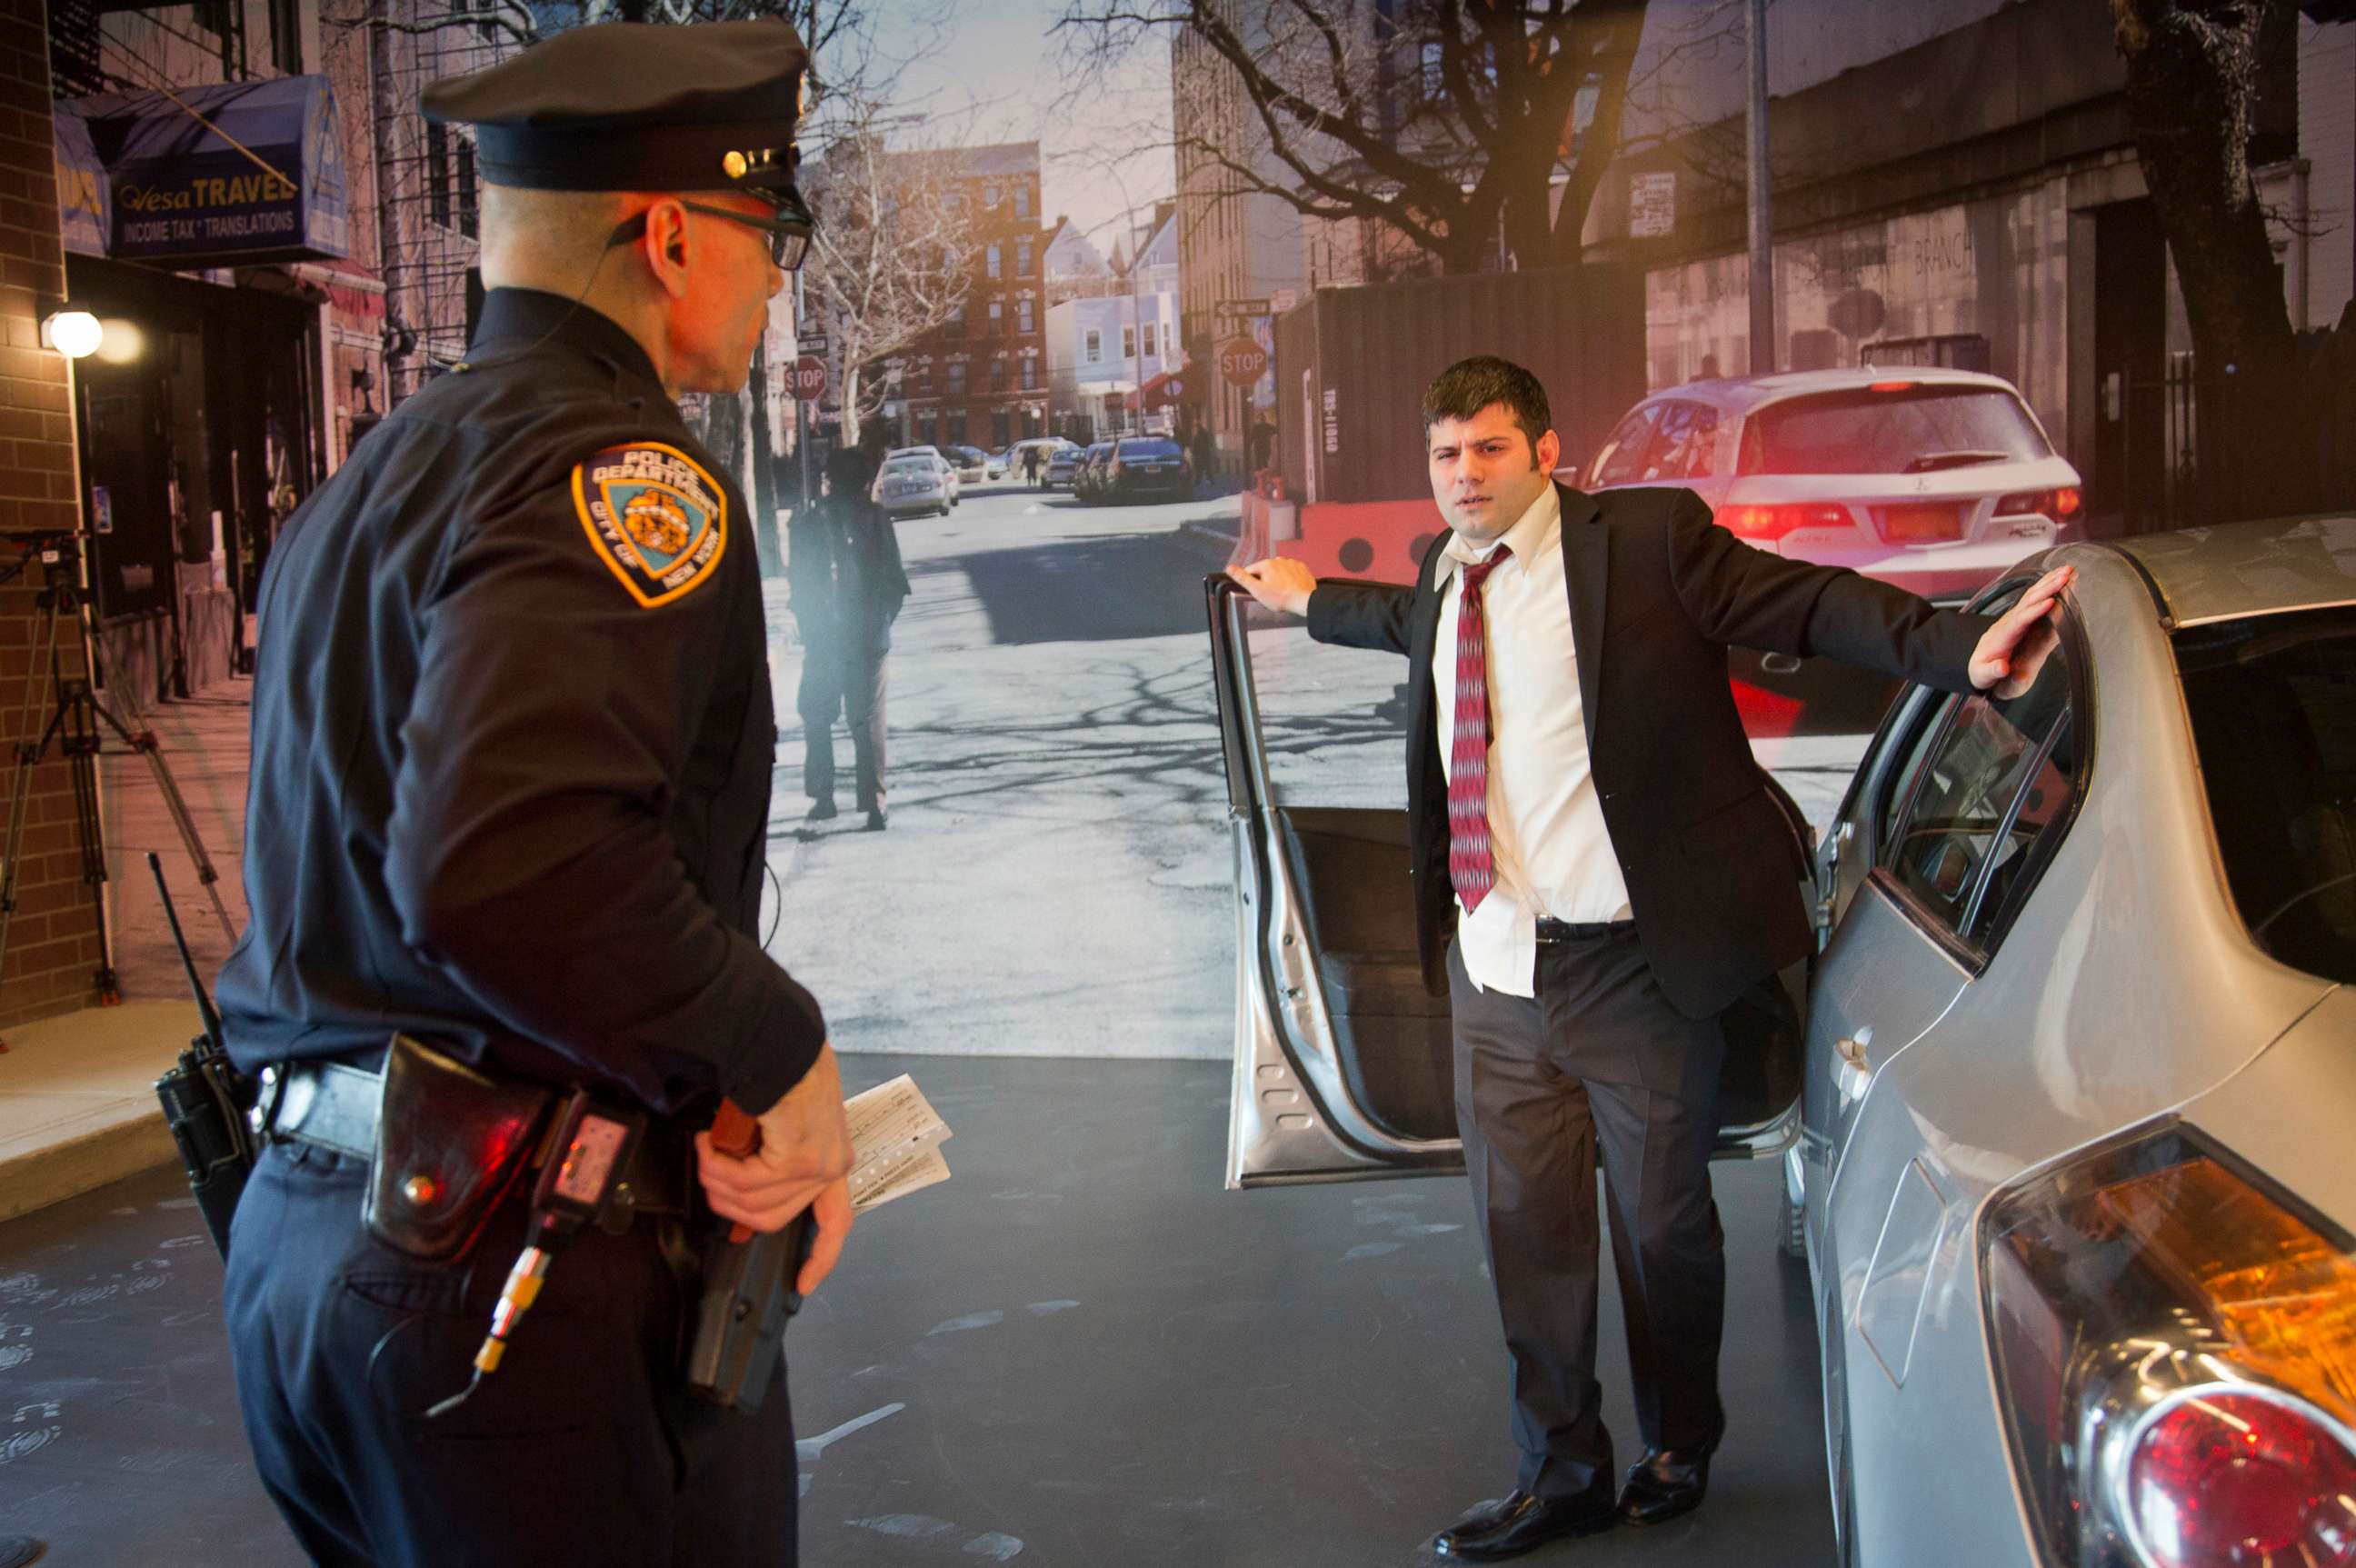 PHOTO: In this Tuesday, March 31, 2015 photo, an NYPD detective and a police officer stage a car stop of a suspected drunk driver during a training demonstration at the new NYPD police academy facility, in New York.